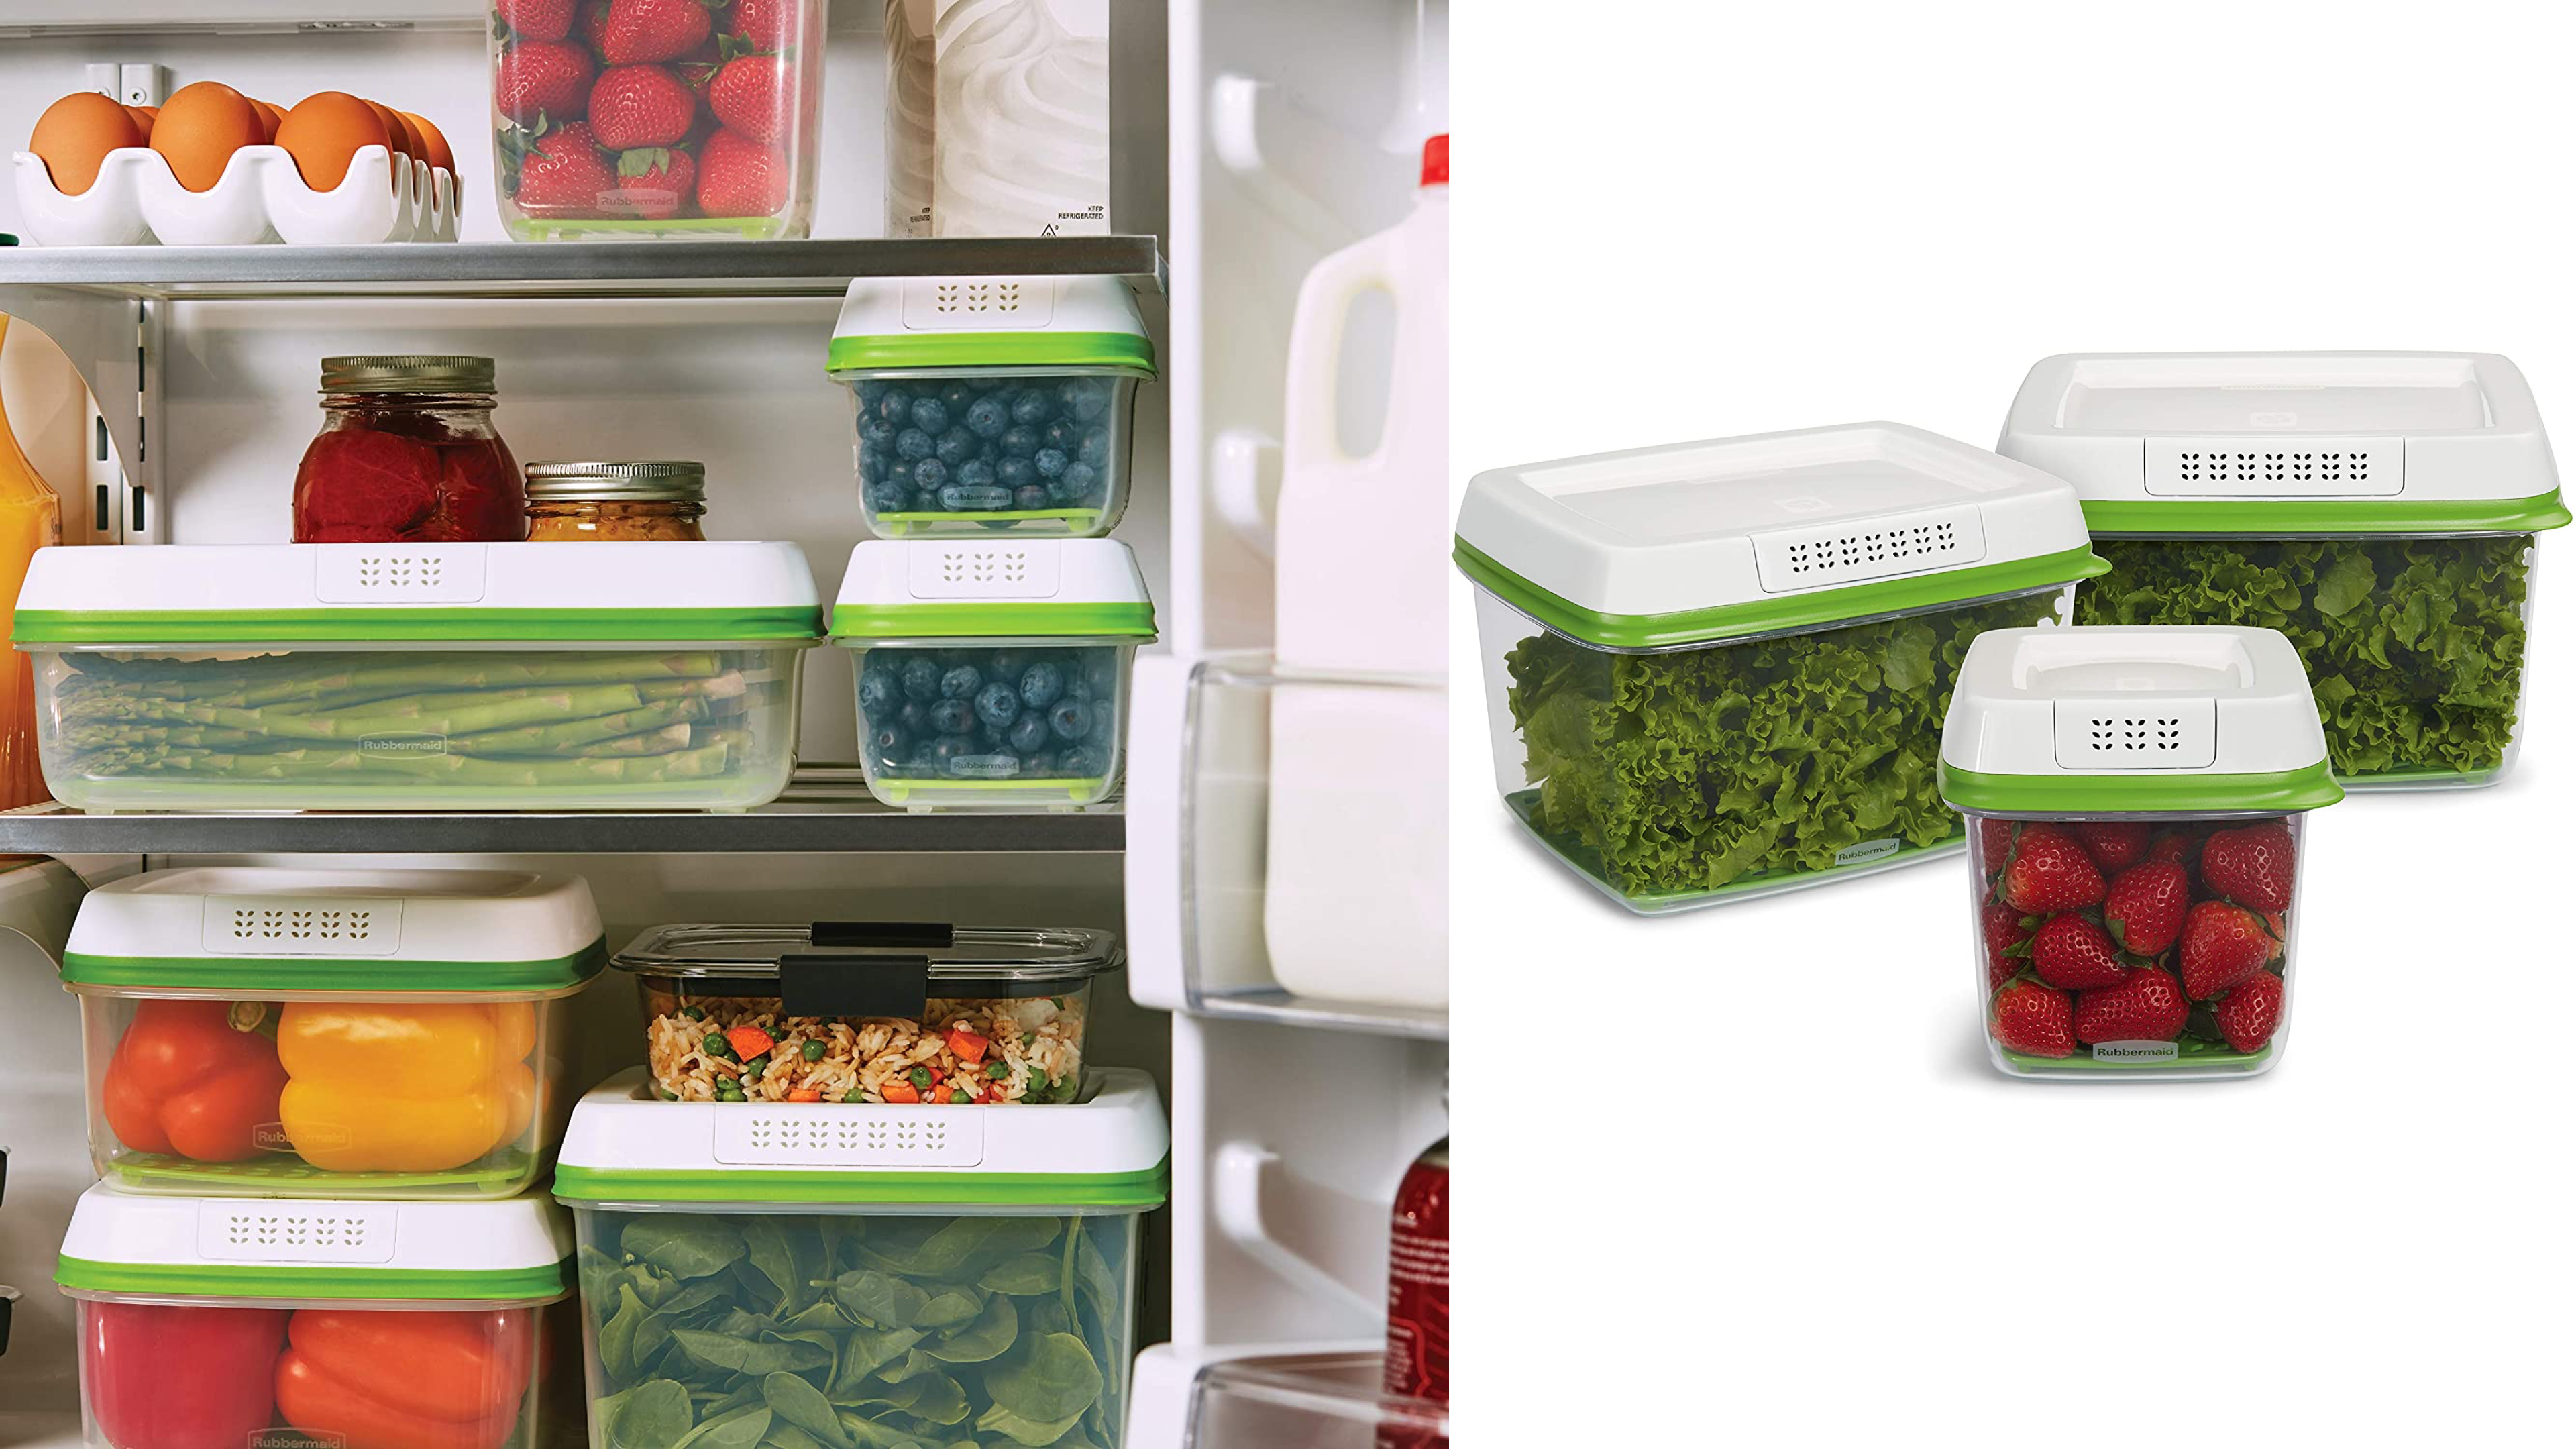 produce saver containers that'll keep your produce fresher for longer